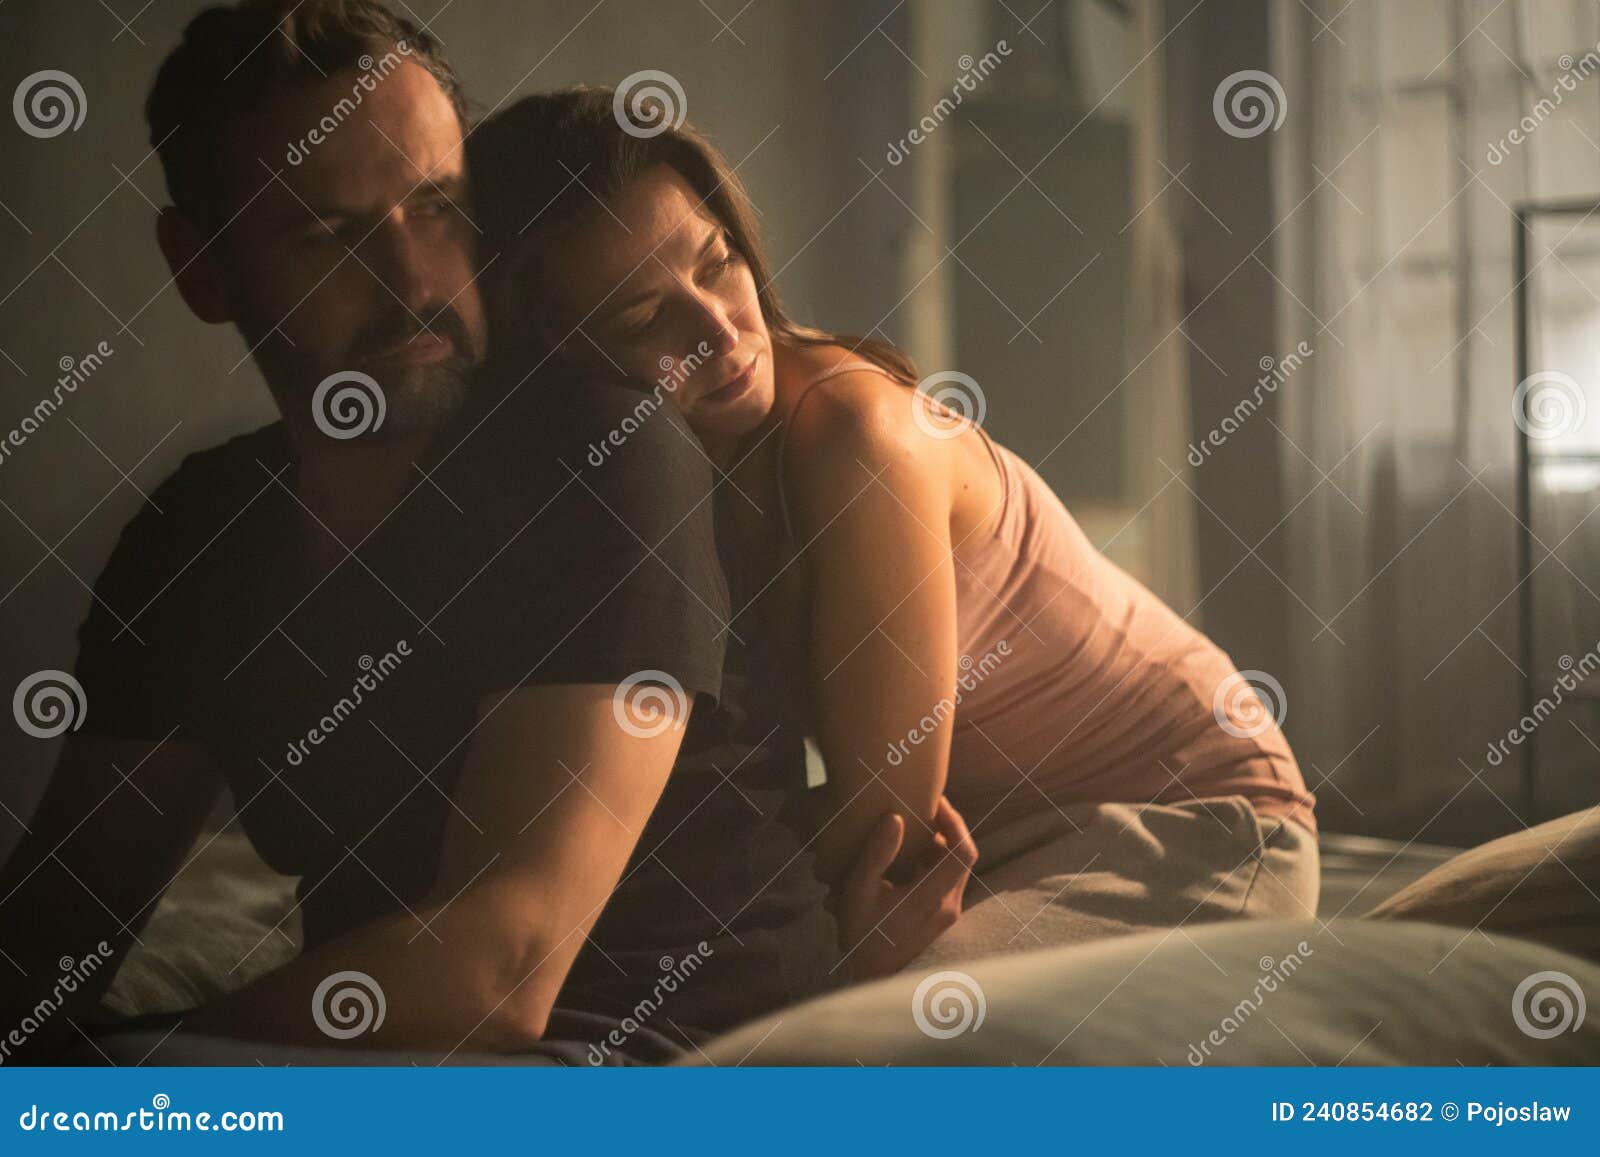 Sad Mature Man is Looking Down, Thinking about Cheating His Wife, while His Wife is Snuggling To Him Stock Photo image